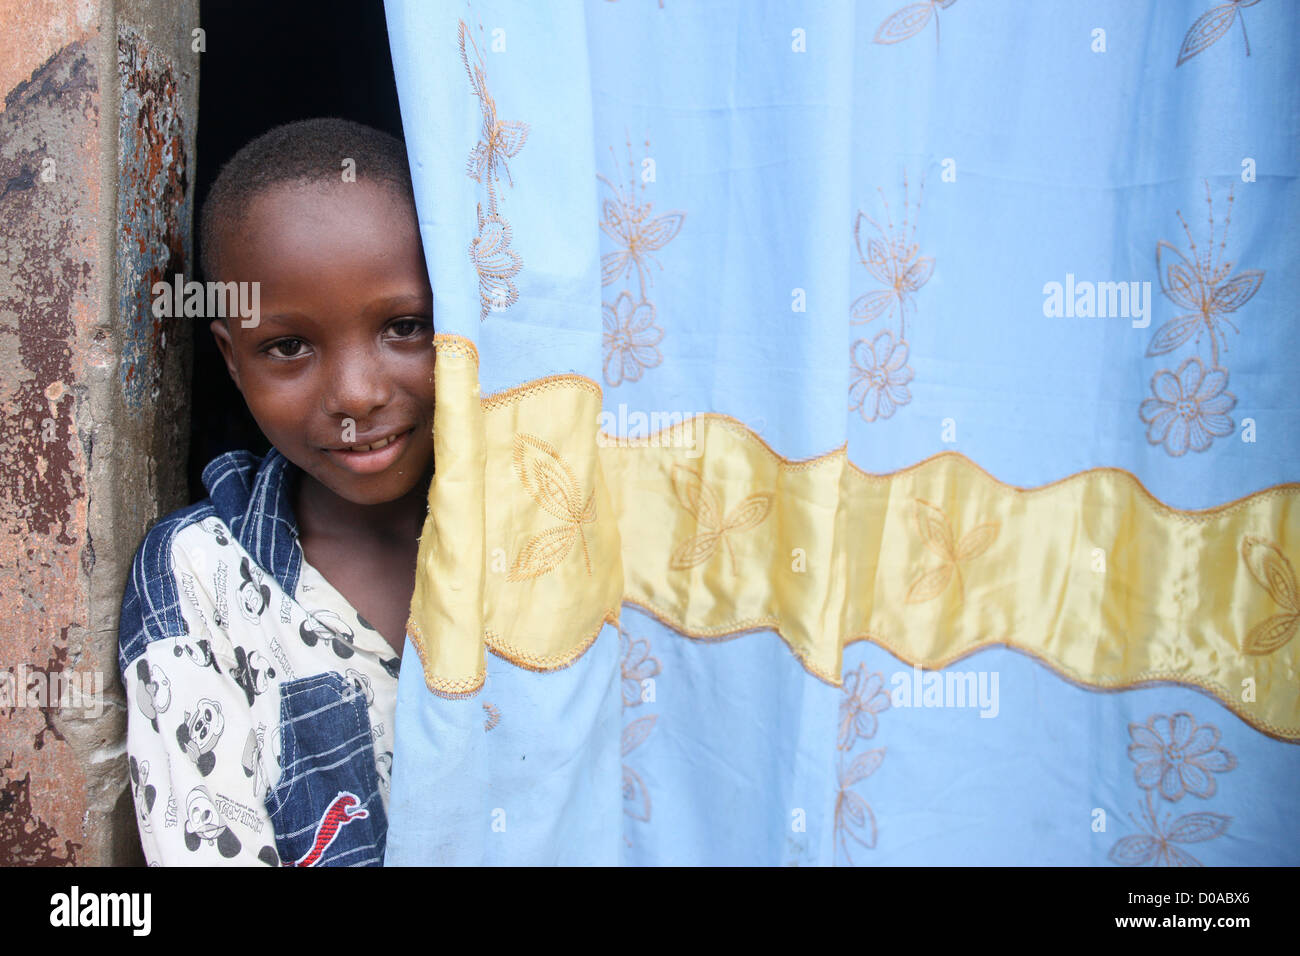 AFRICAN CHILD Stock Photo